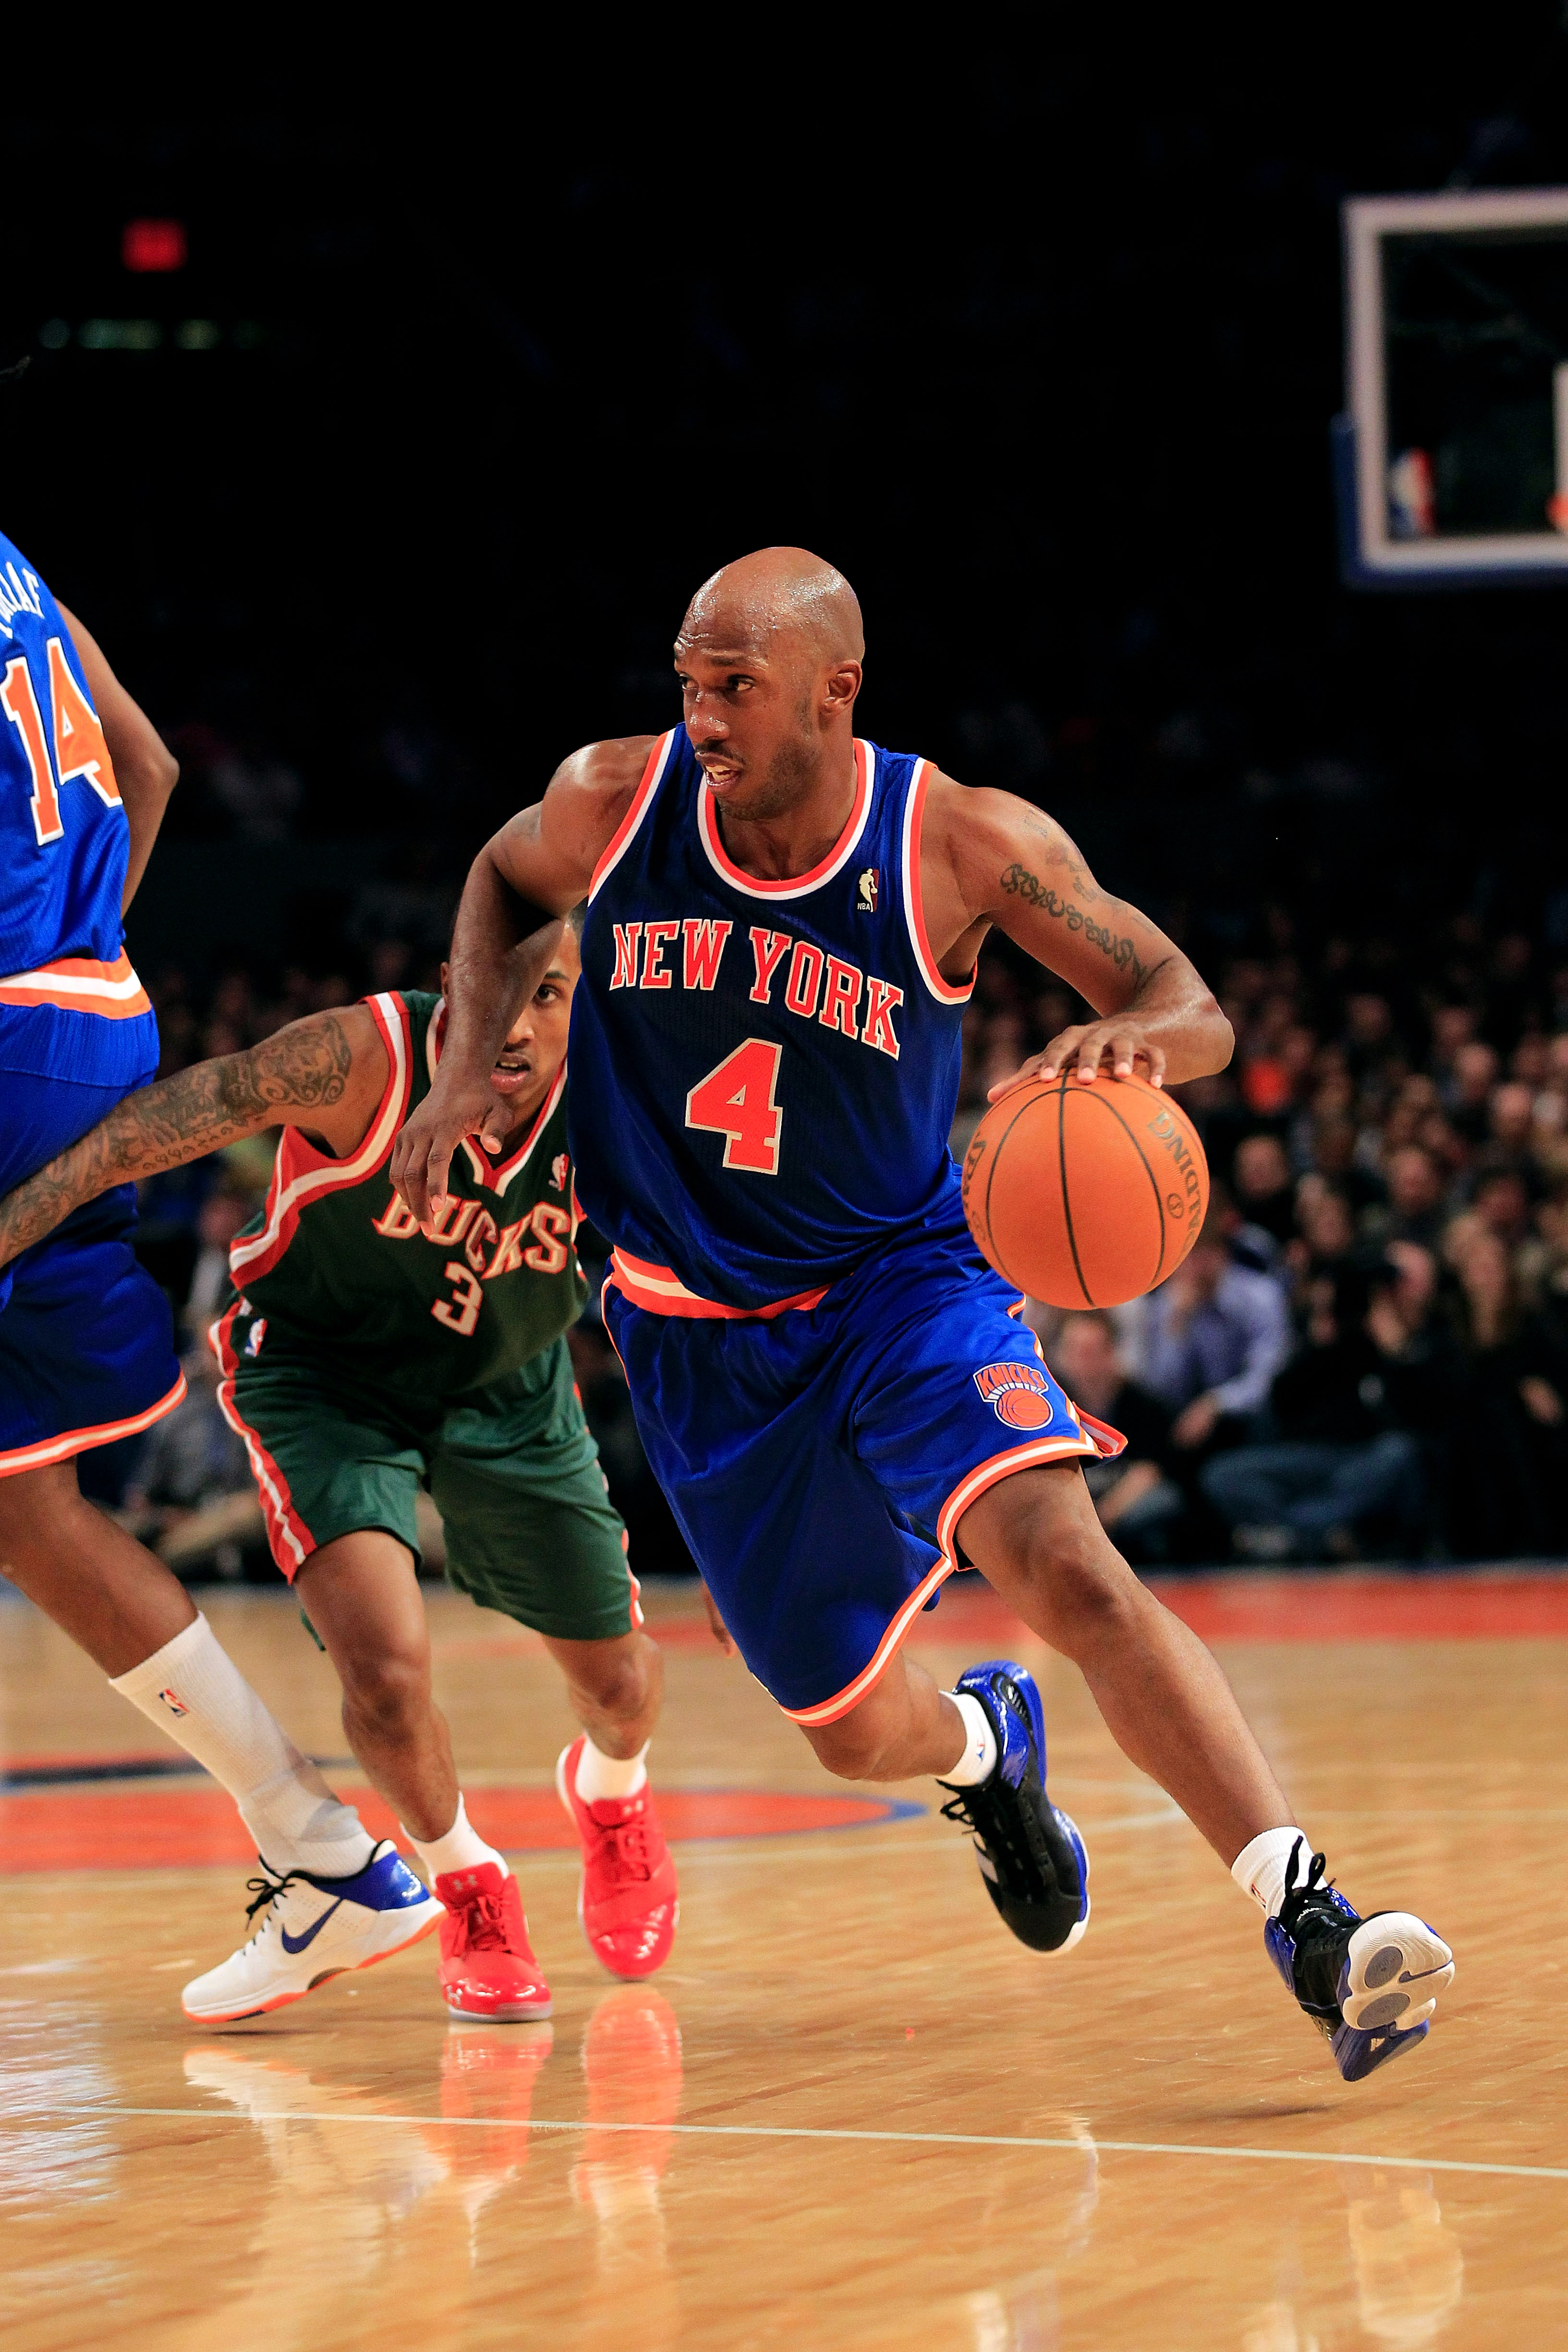 NEW YORK, NY - FEBRUARY 23:  Chauncey Billups #4 of the New York Knicks dribbles the ball past  Corey Maggette of the Milwaukee Bucks at Madison Square Garden on February 23, 2011 in New York City. NOTE TO USER: User expressly acknowledges and agrees that